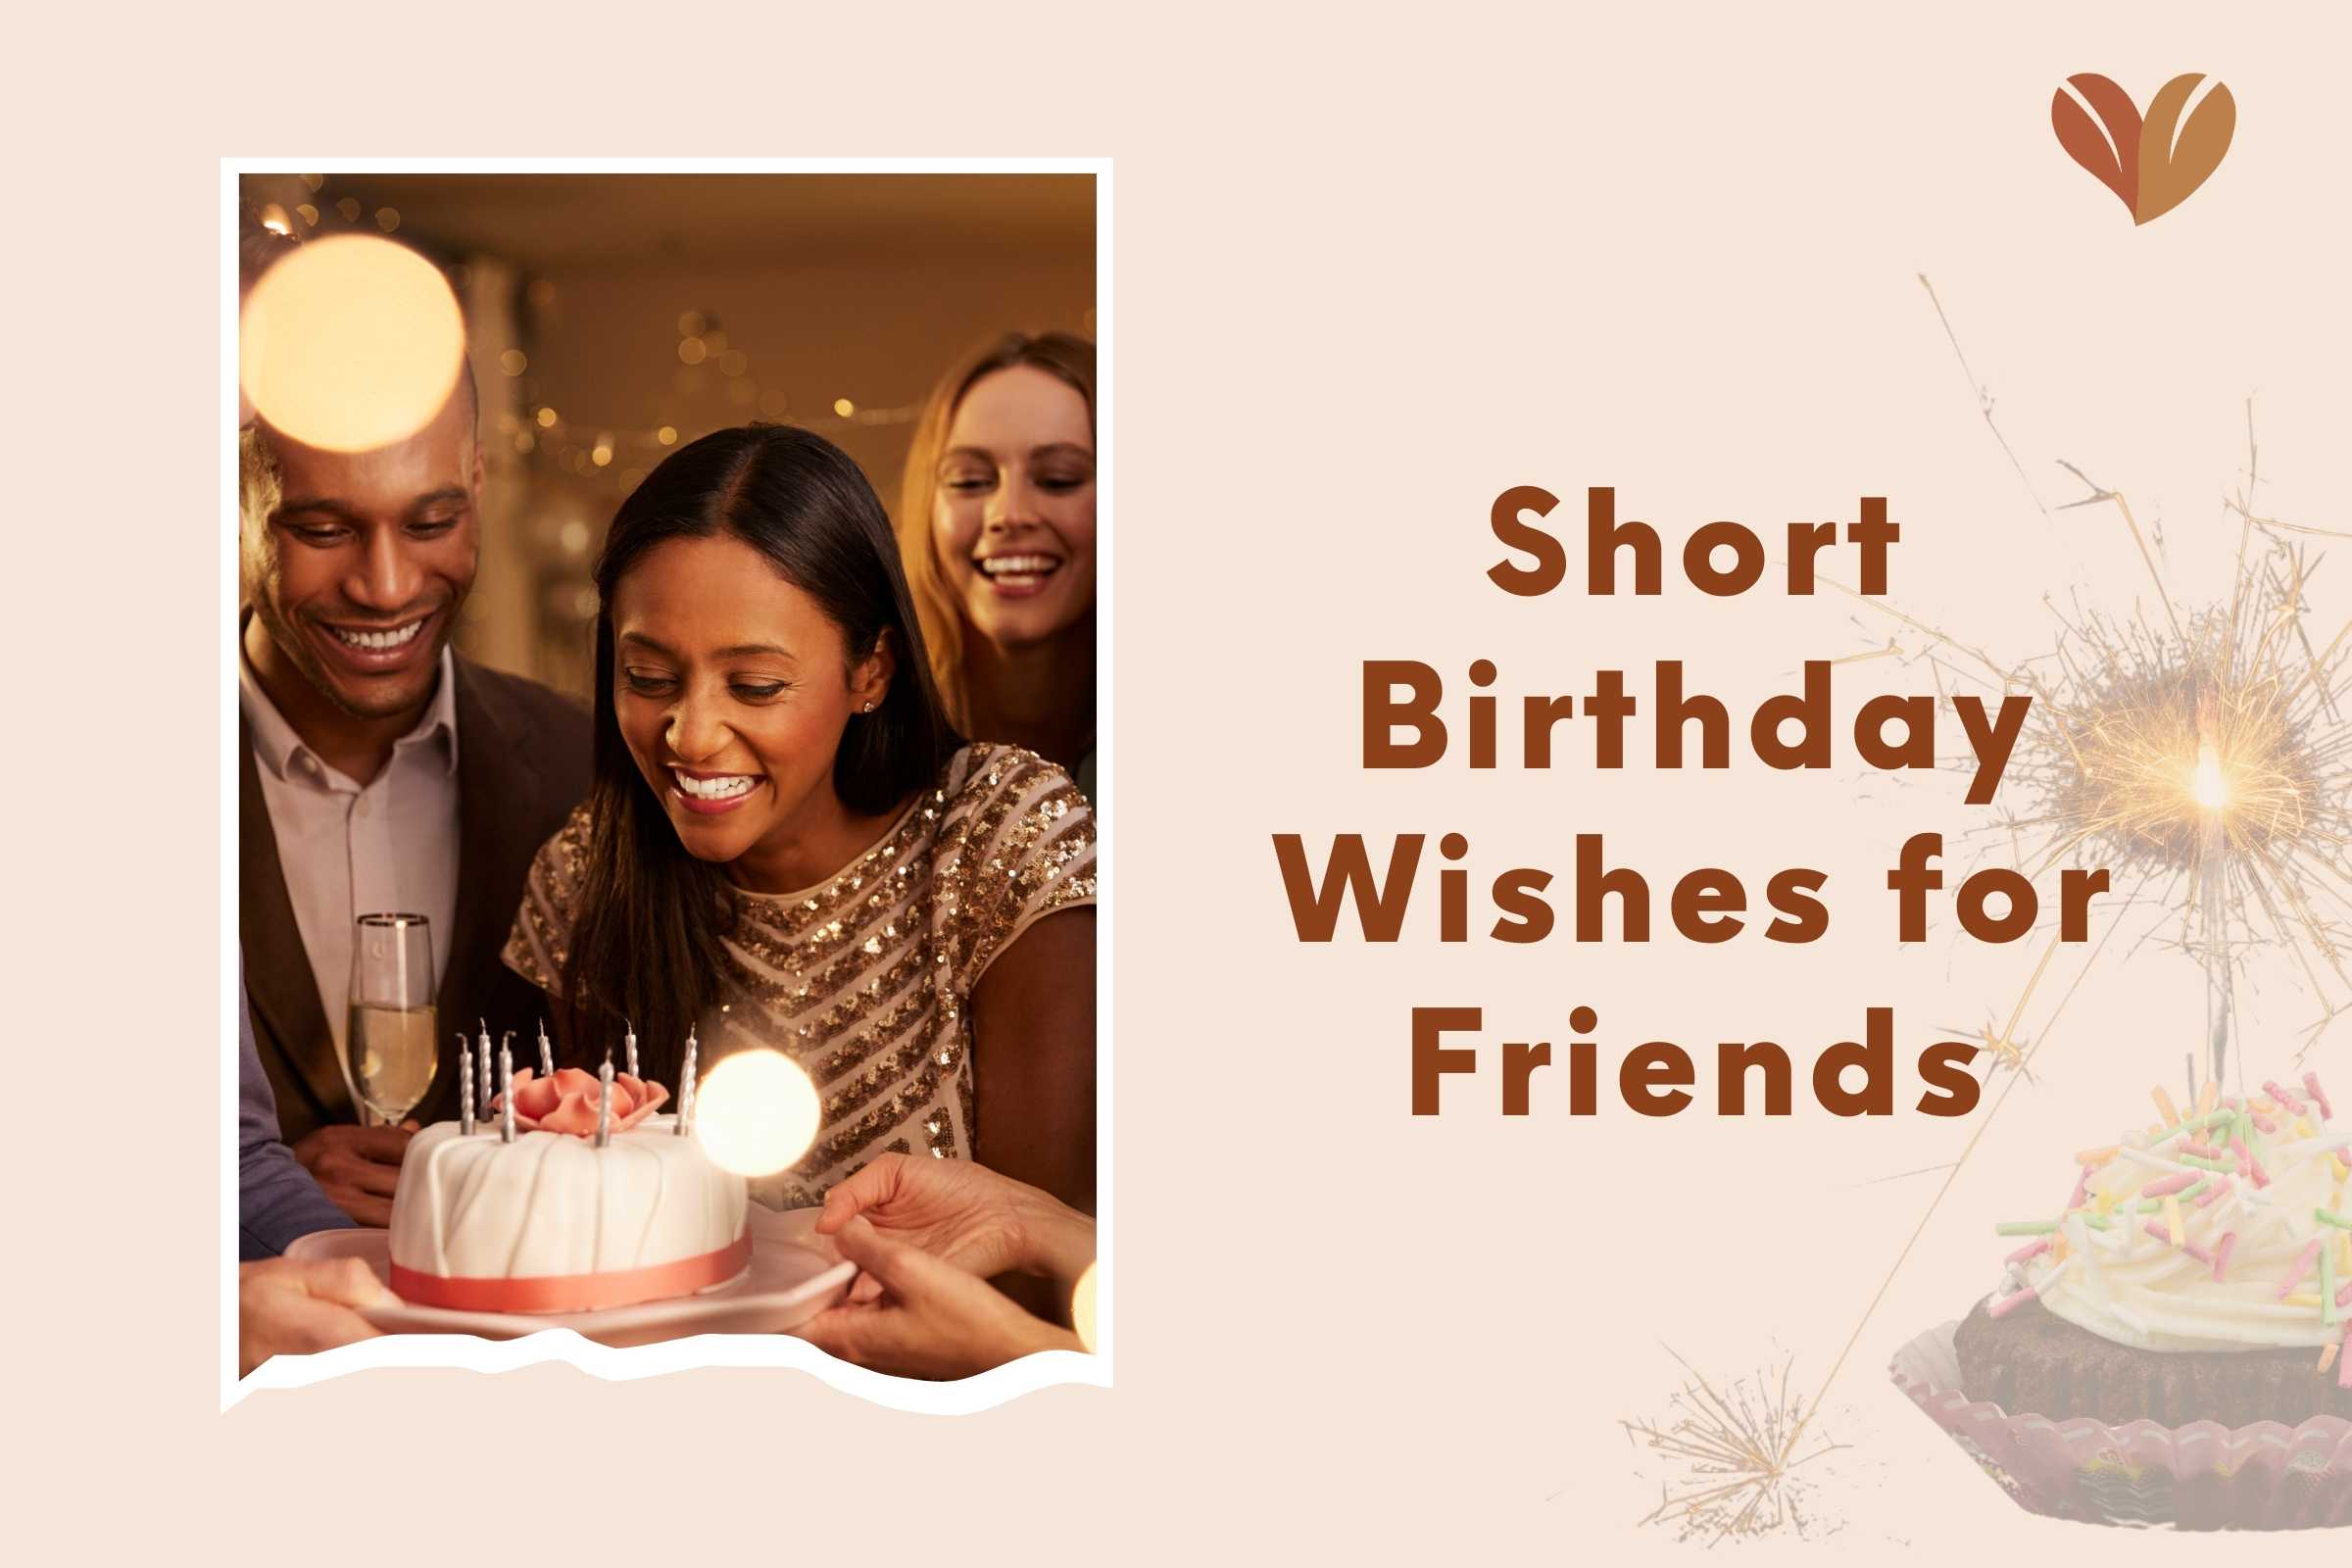 100 Birthday wishes for friend: Celebrate your loved ones